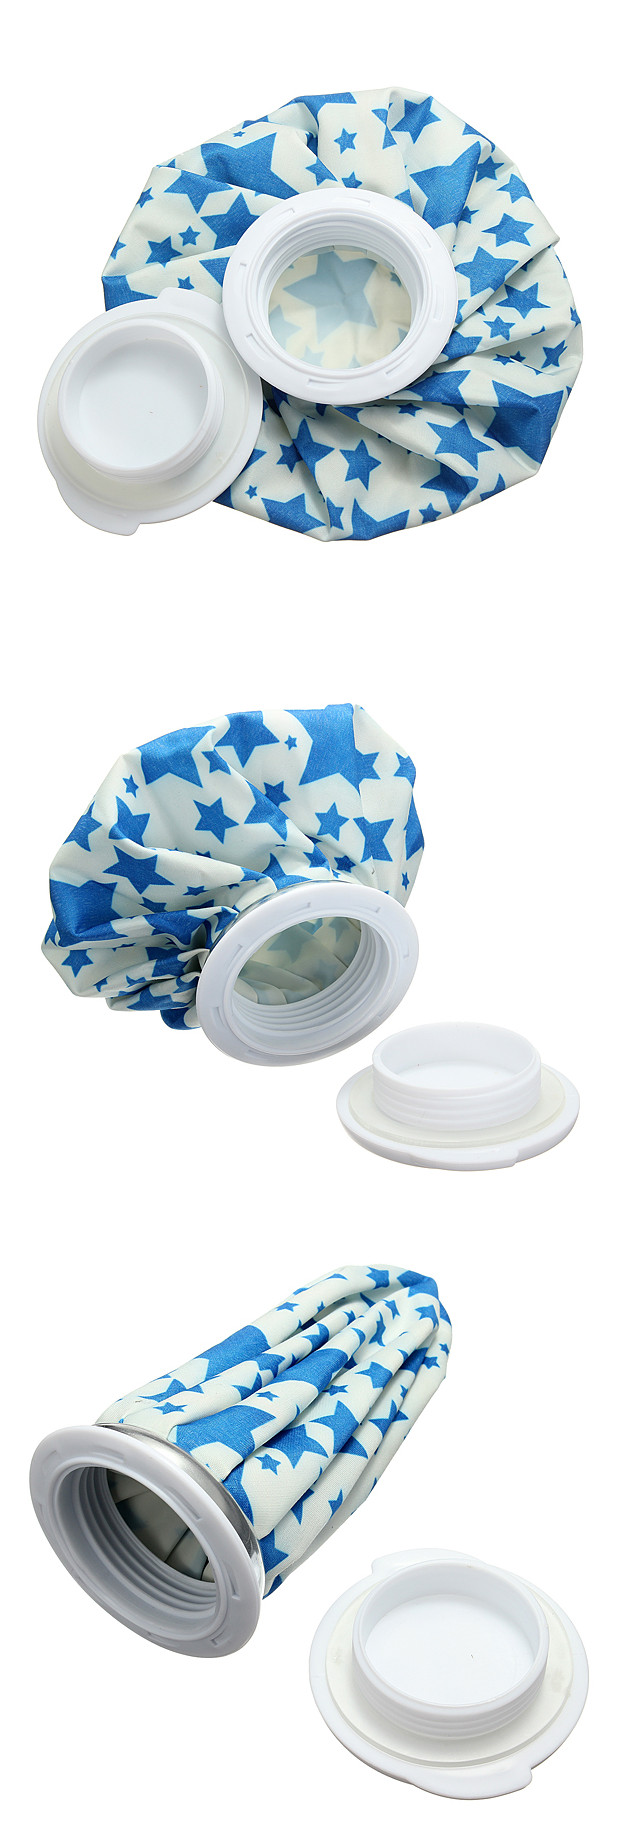 Sports-Health-Care-Ice-Bag-Pack-Cap-For-Muscle-Aches-Injury-First-Aid-Care-929628